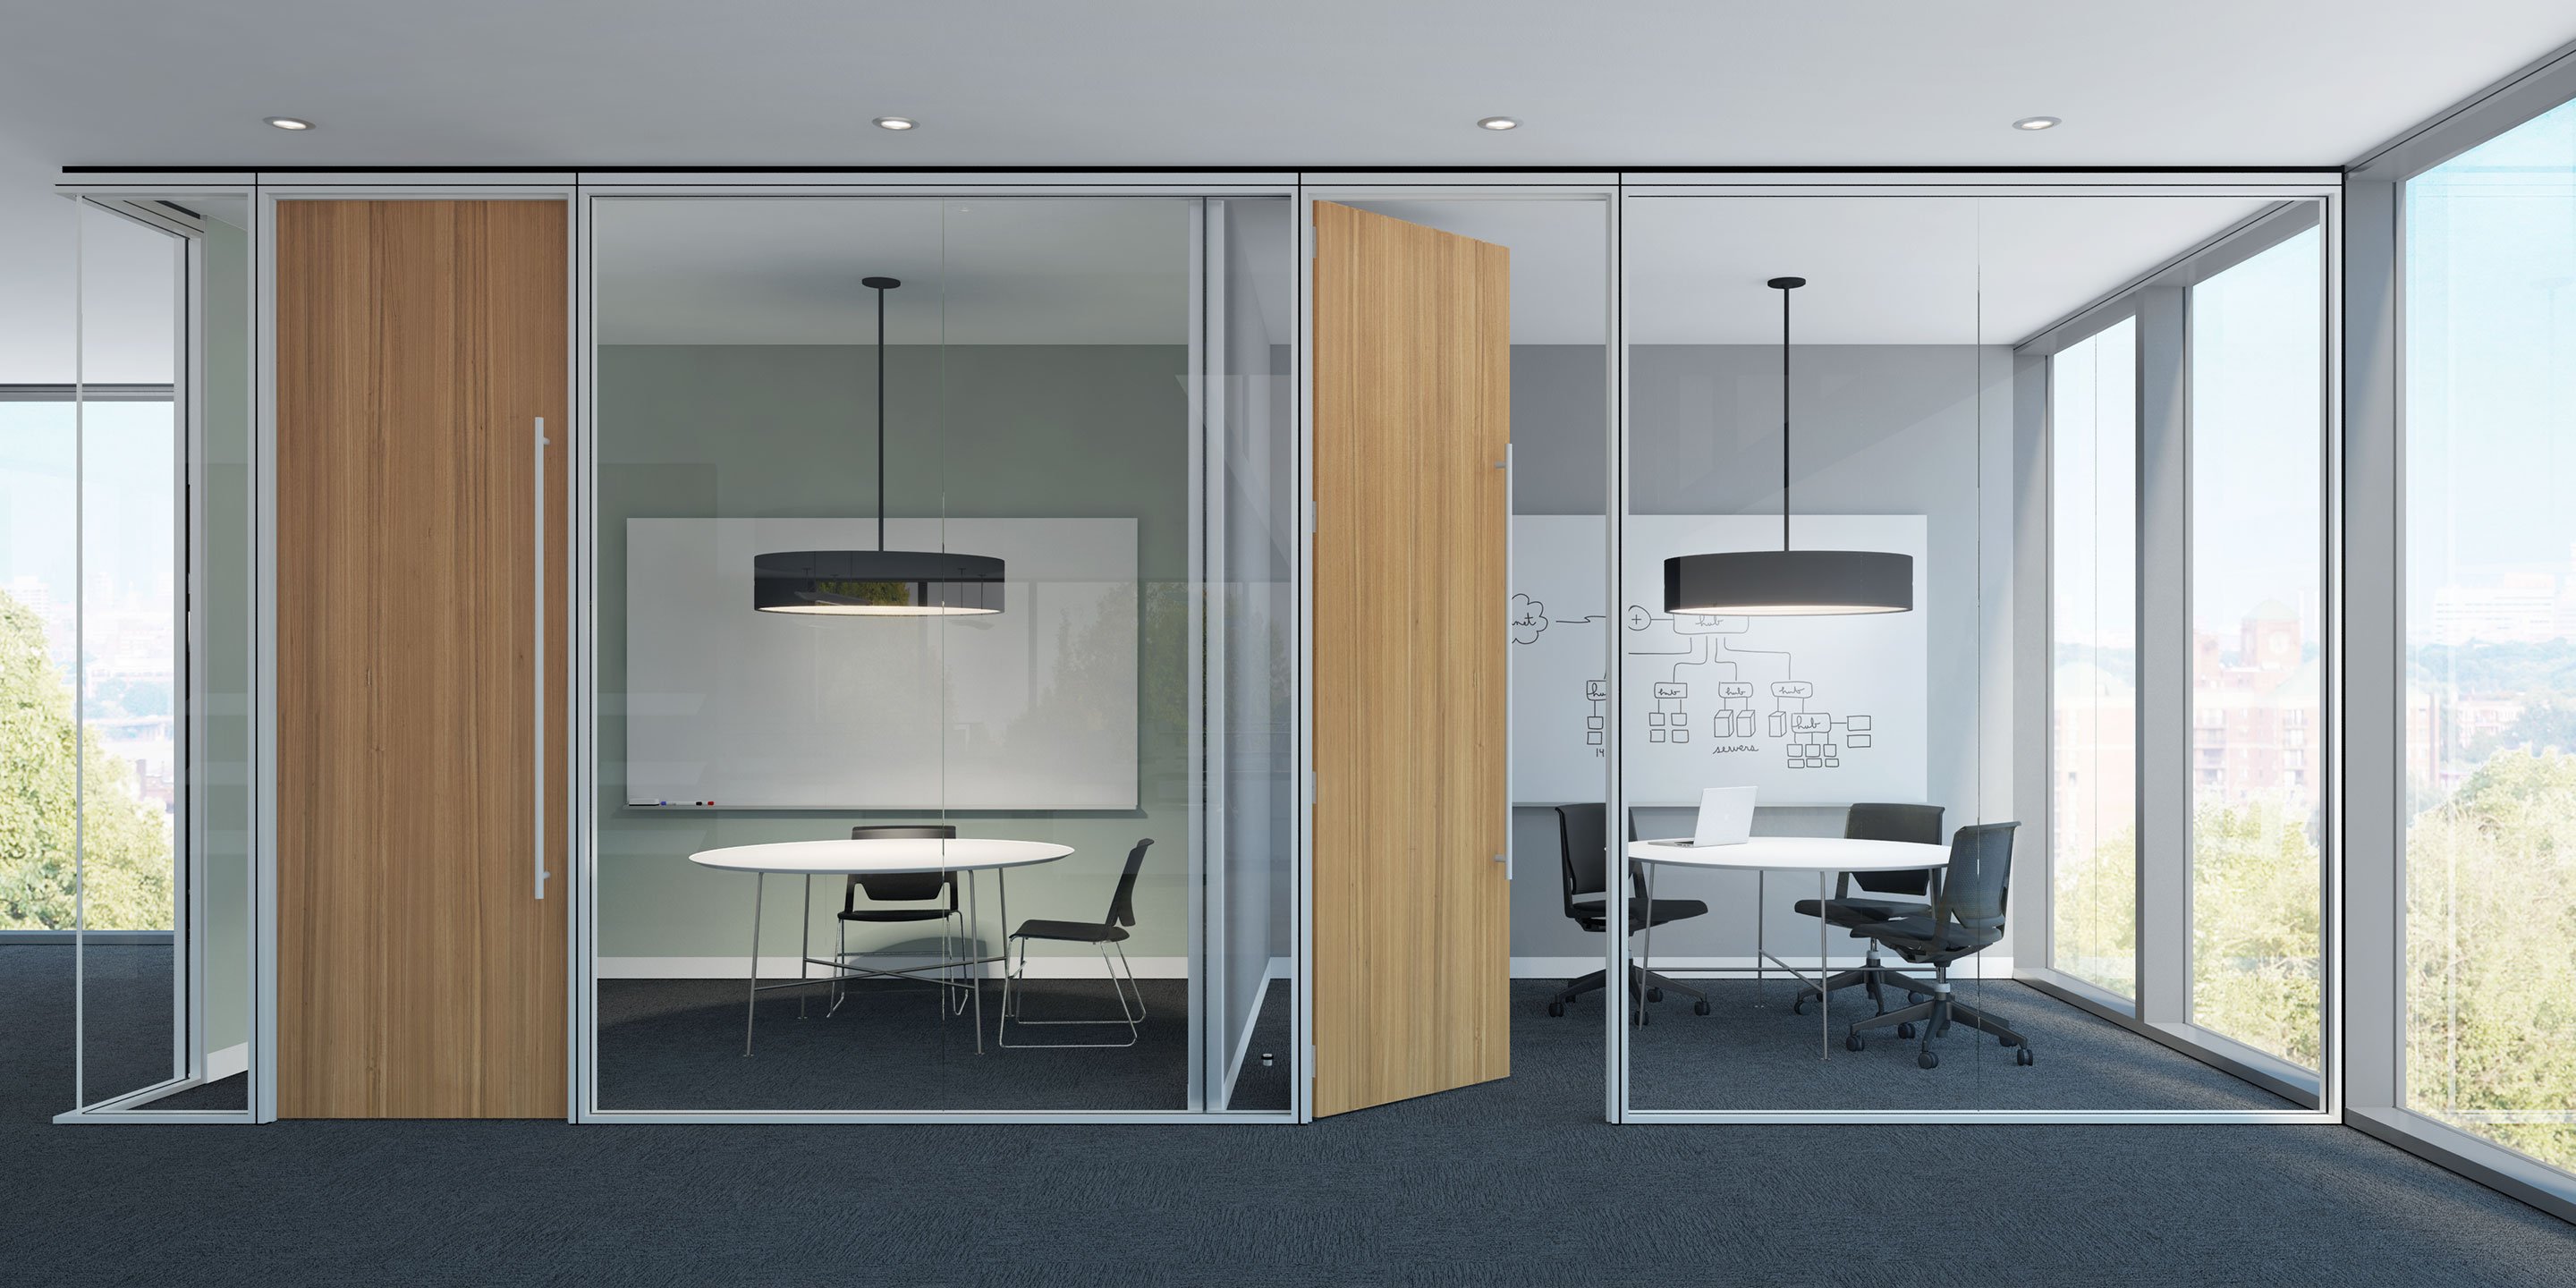 Haworth Enclose Frameless Glass Wall for private collaboration rooms in office that have white circle desks and office chairs next to glass window looking out to trees